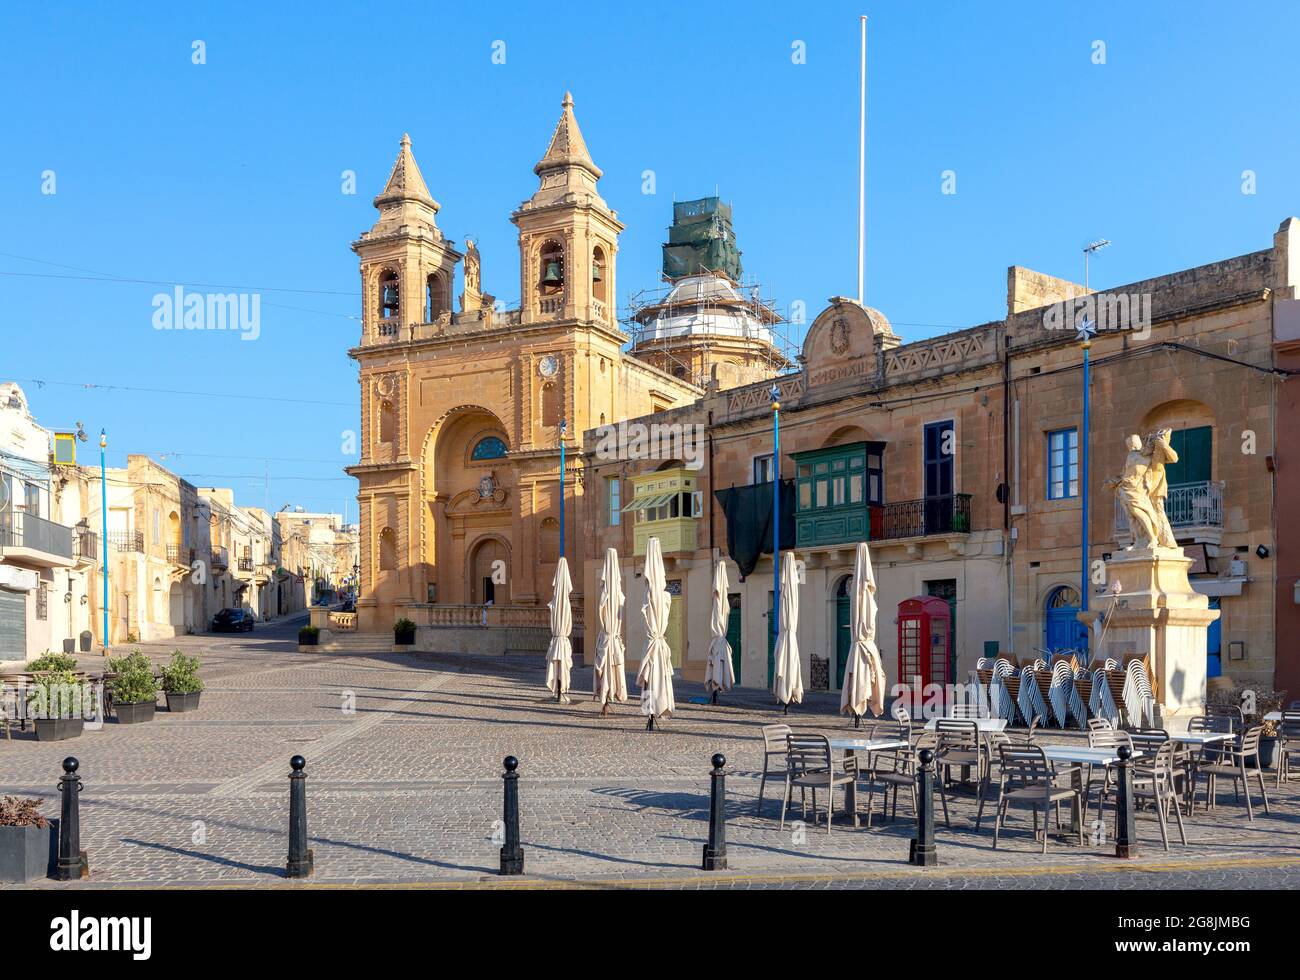 Facade and belfries of the old church of St. Peter on a sunny morning. Marsaxlokk. Malta. Stock Photo